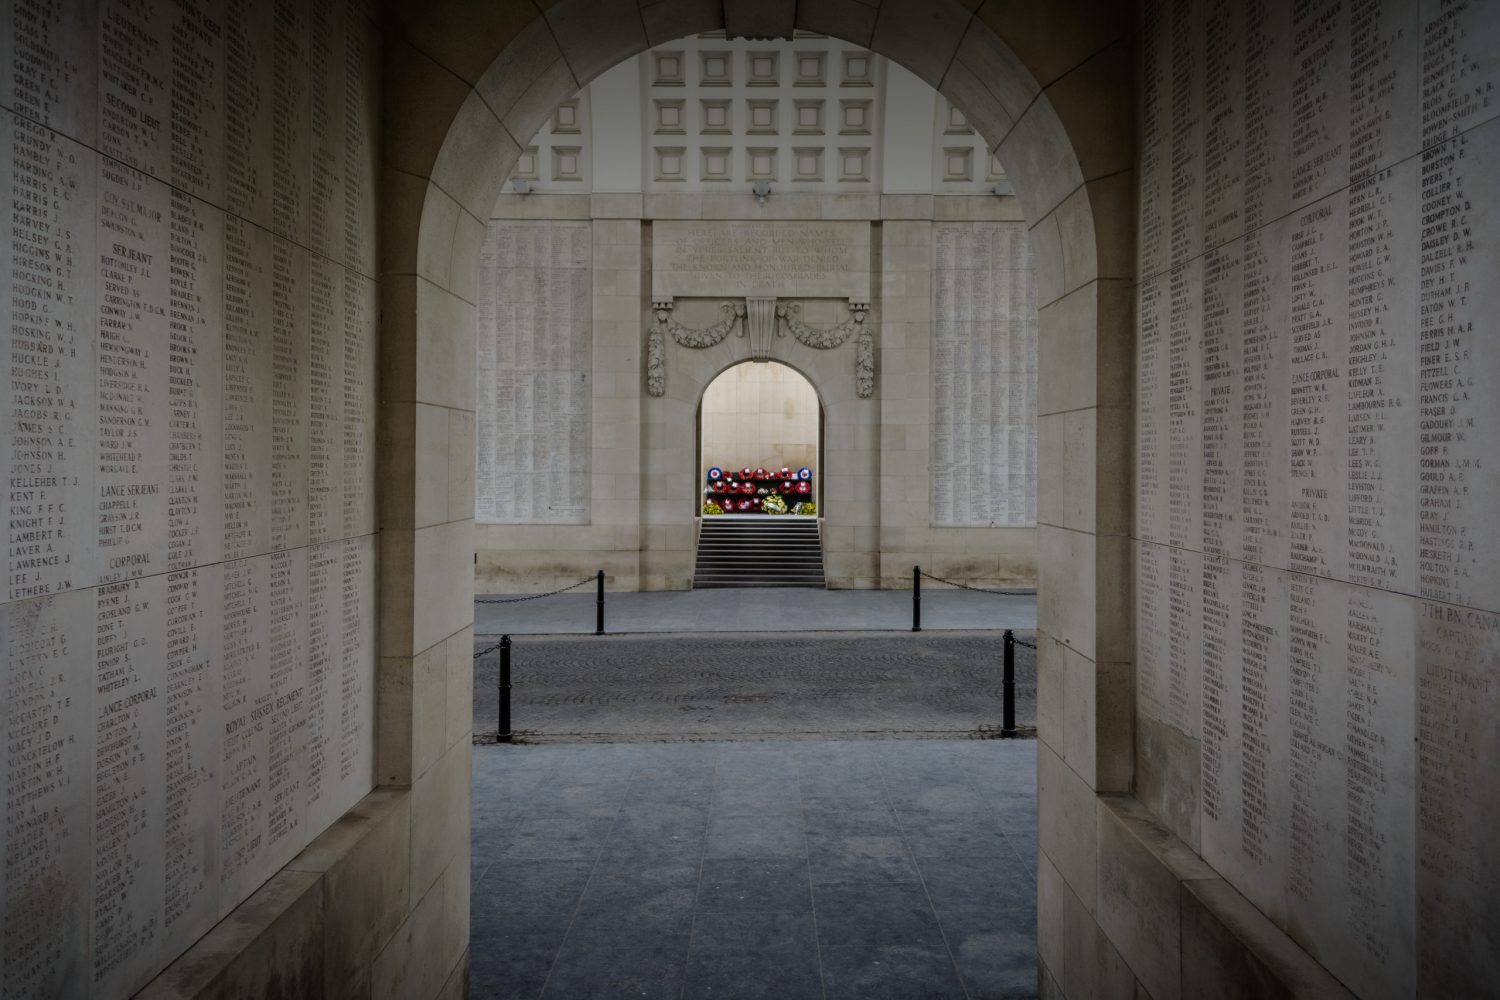 A view of the interior of the Menin Gate with the names of fallen soldiers inscribed on the walls, Ypres, Belgium